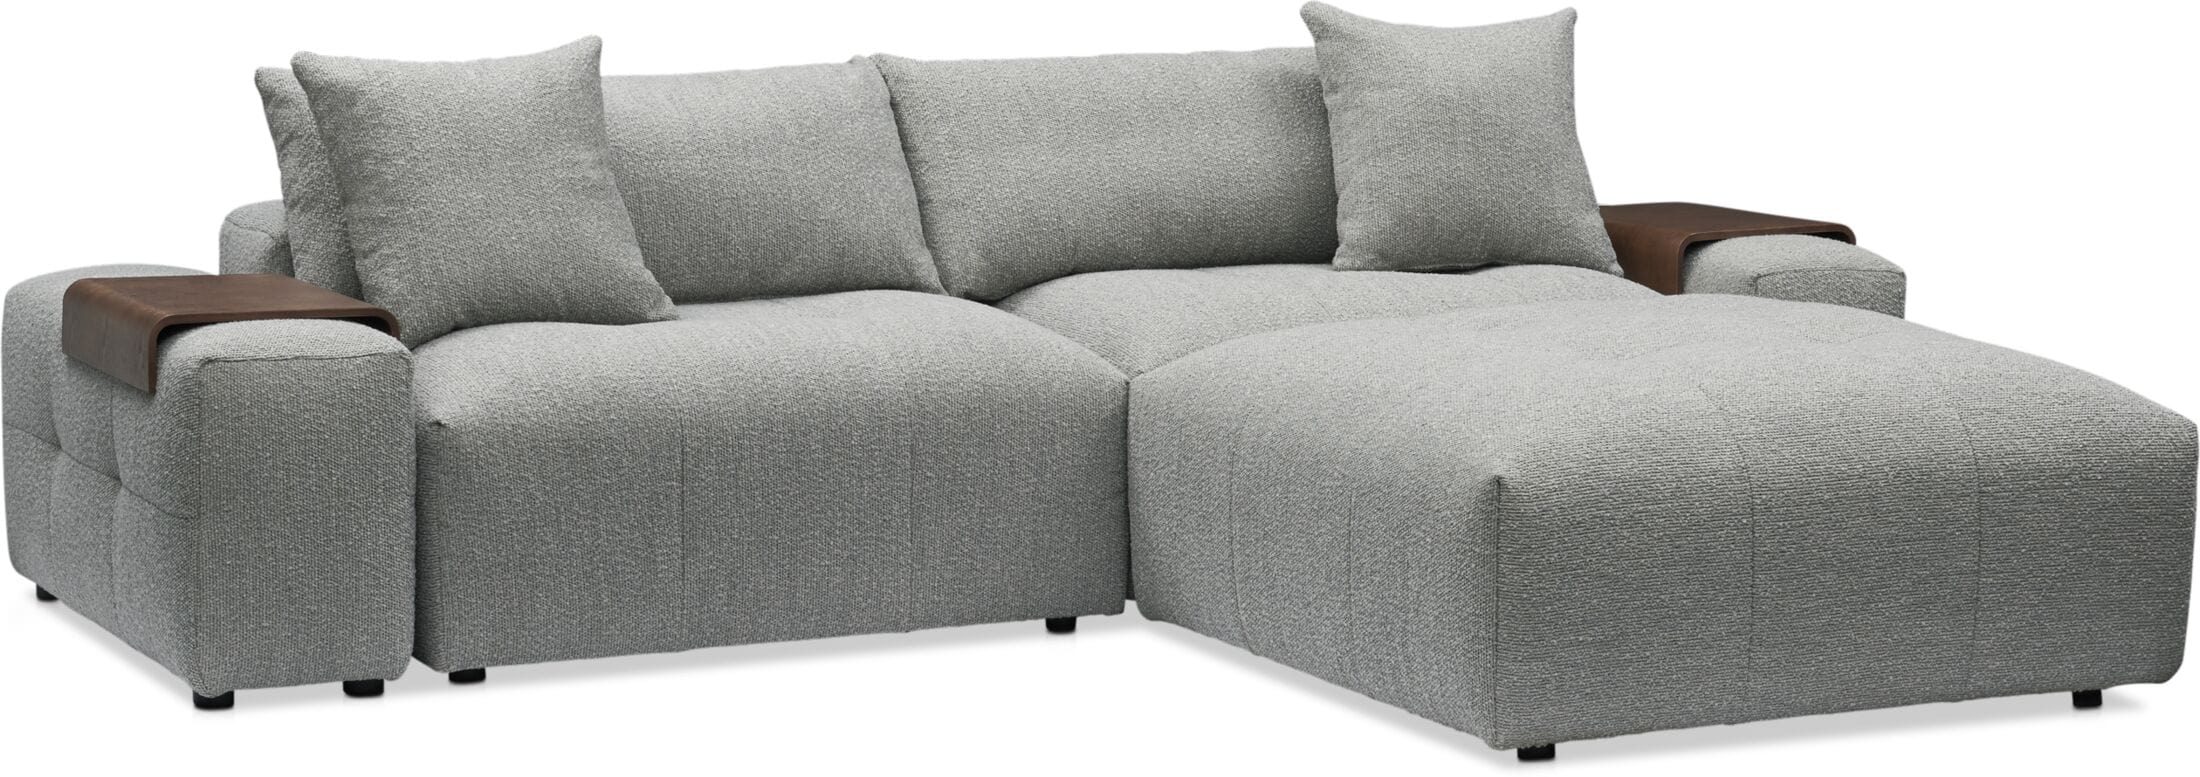 Bliss Gray 5 Pc Sectional And Ottoman 2979667 1728964 